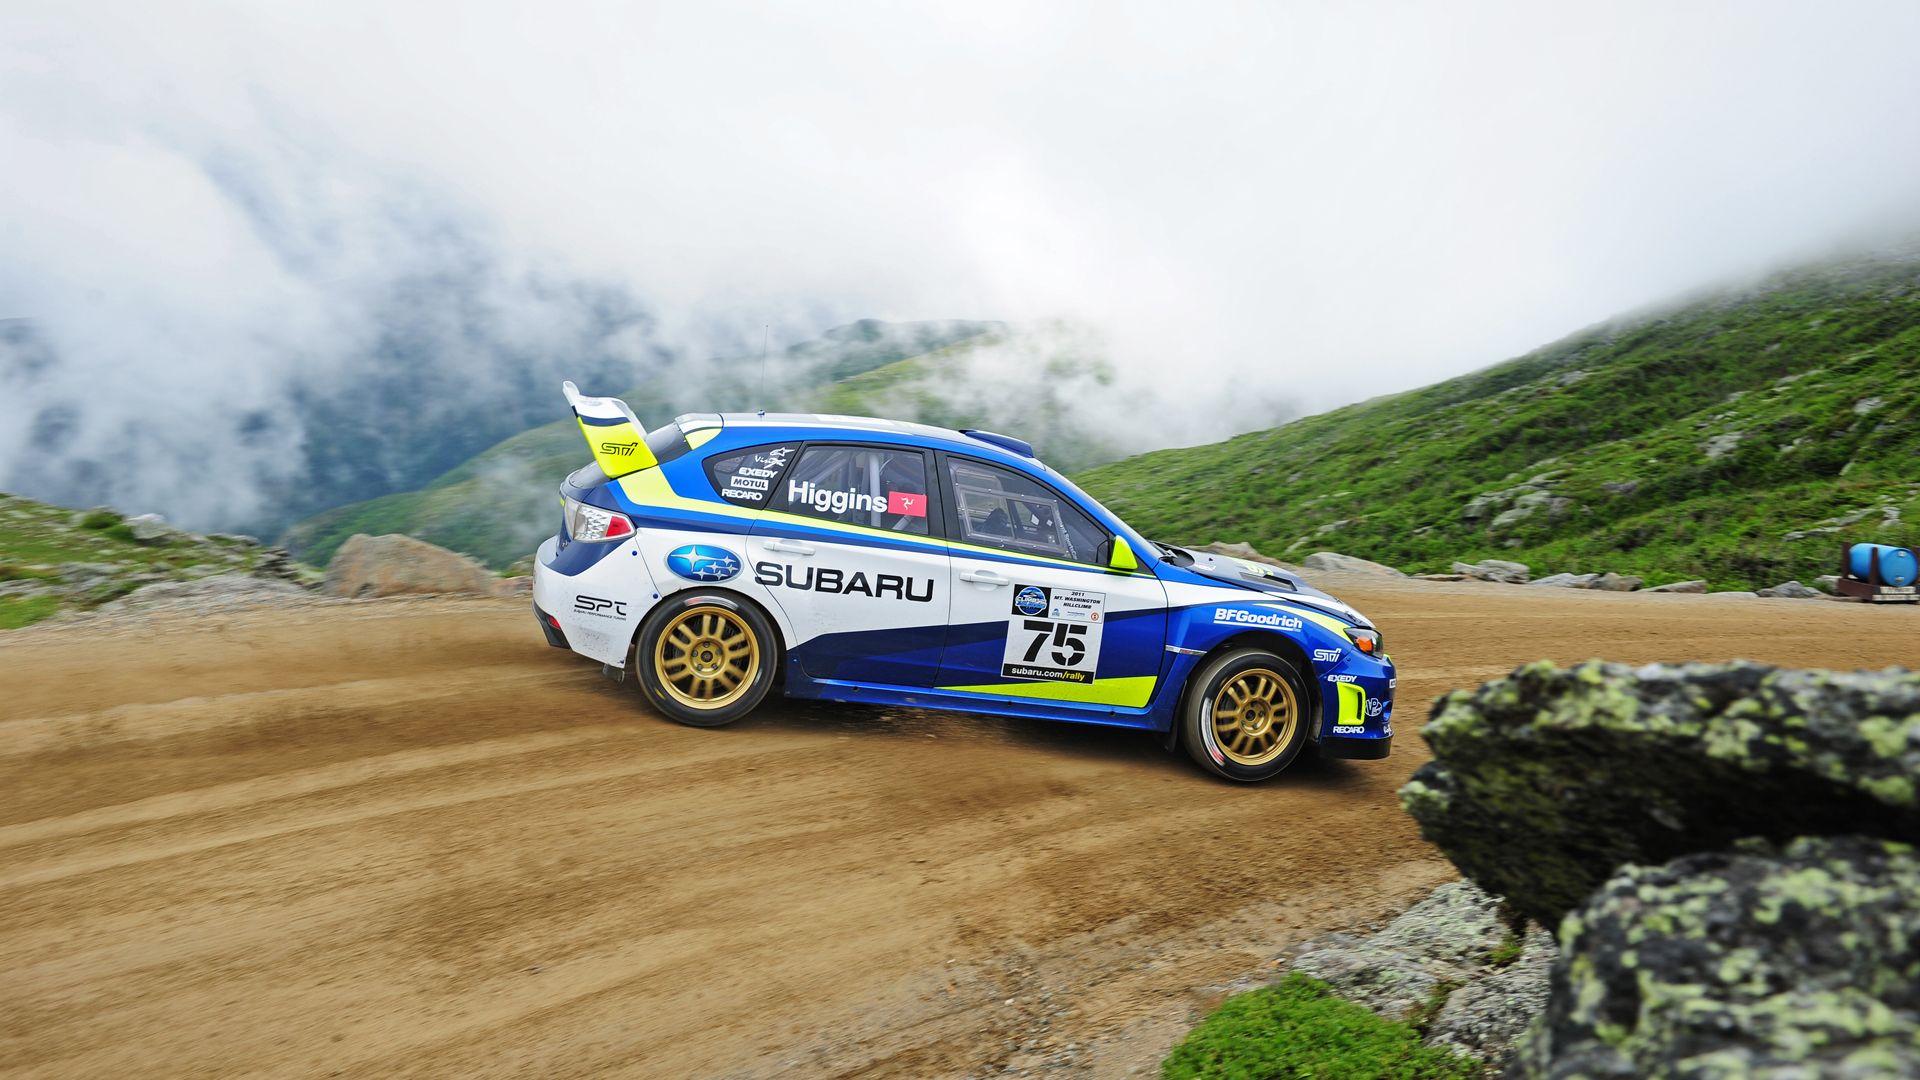 Awesome Rally Car Wallpaper 33287 1920x1080 px